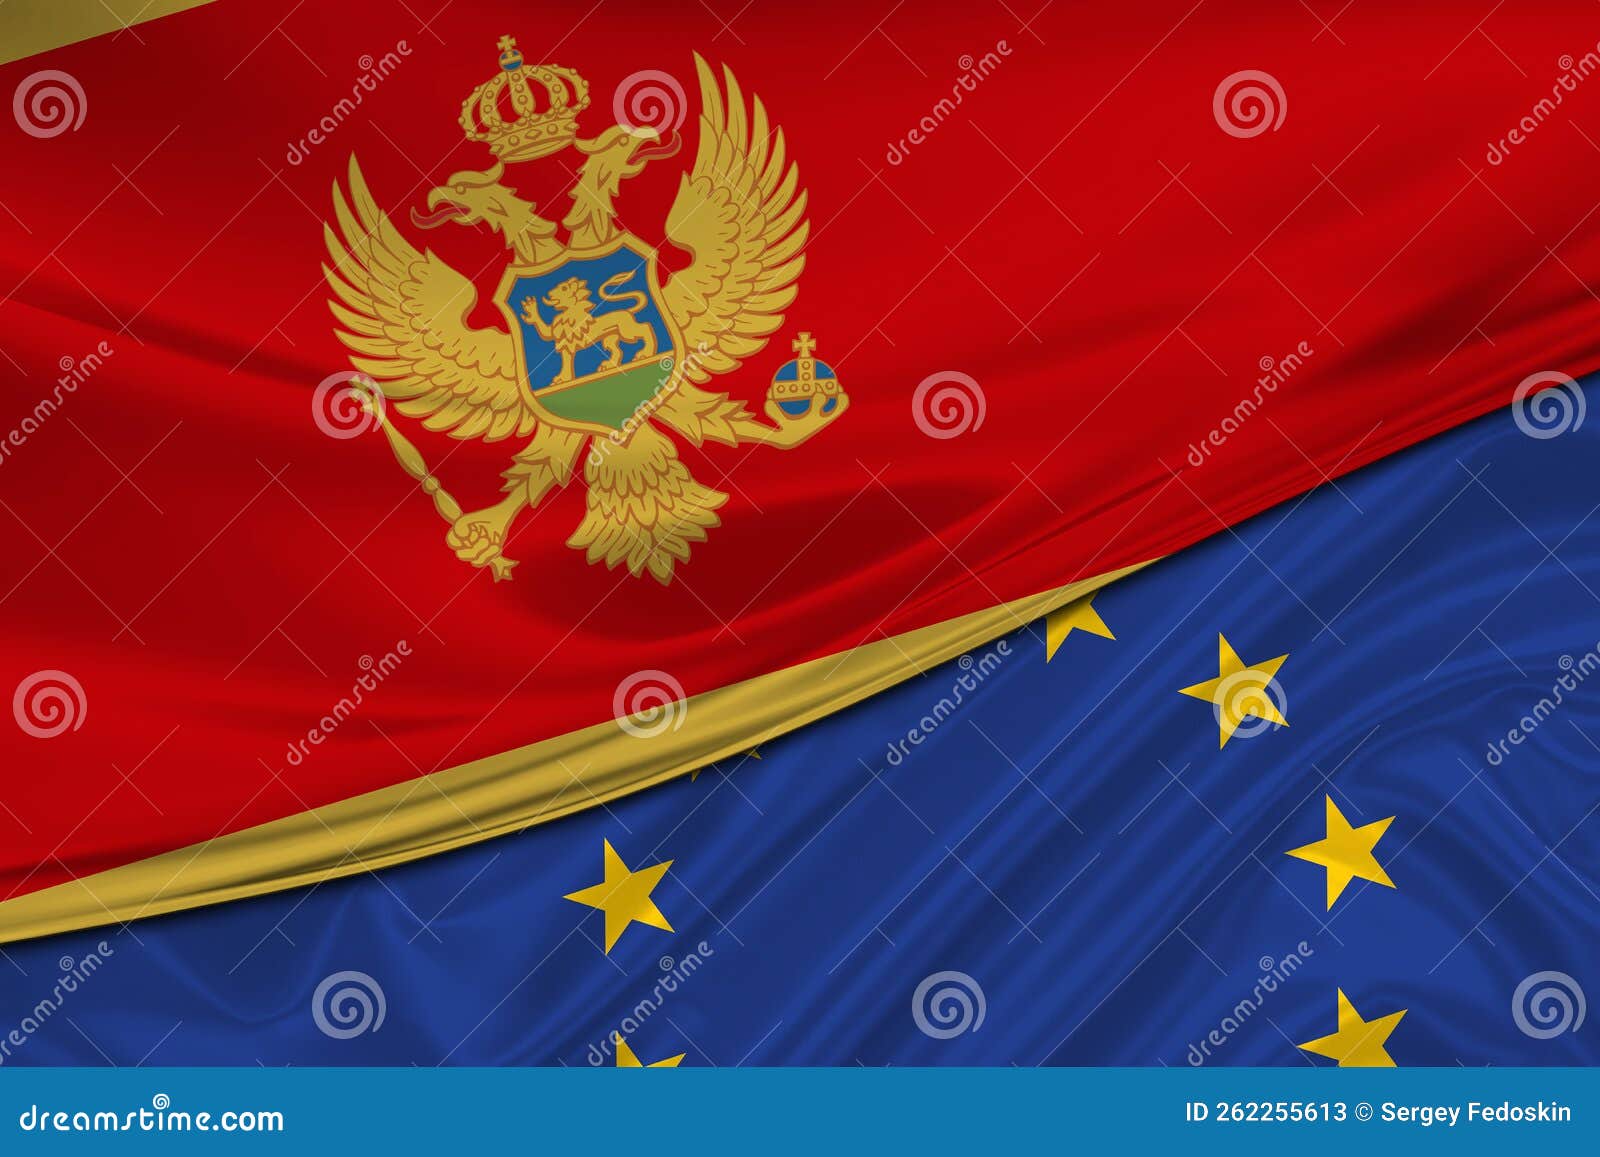 flags of montenegro and europe union. international relationships